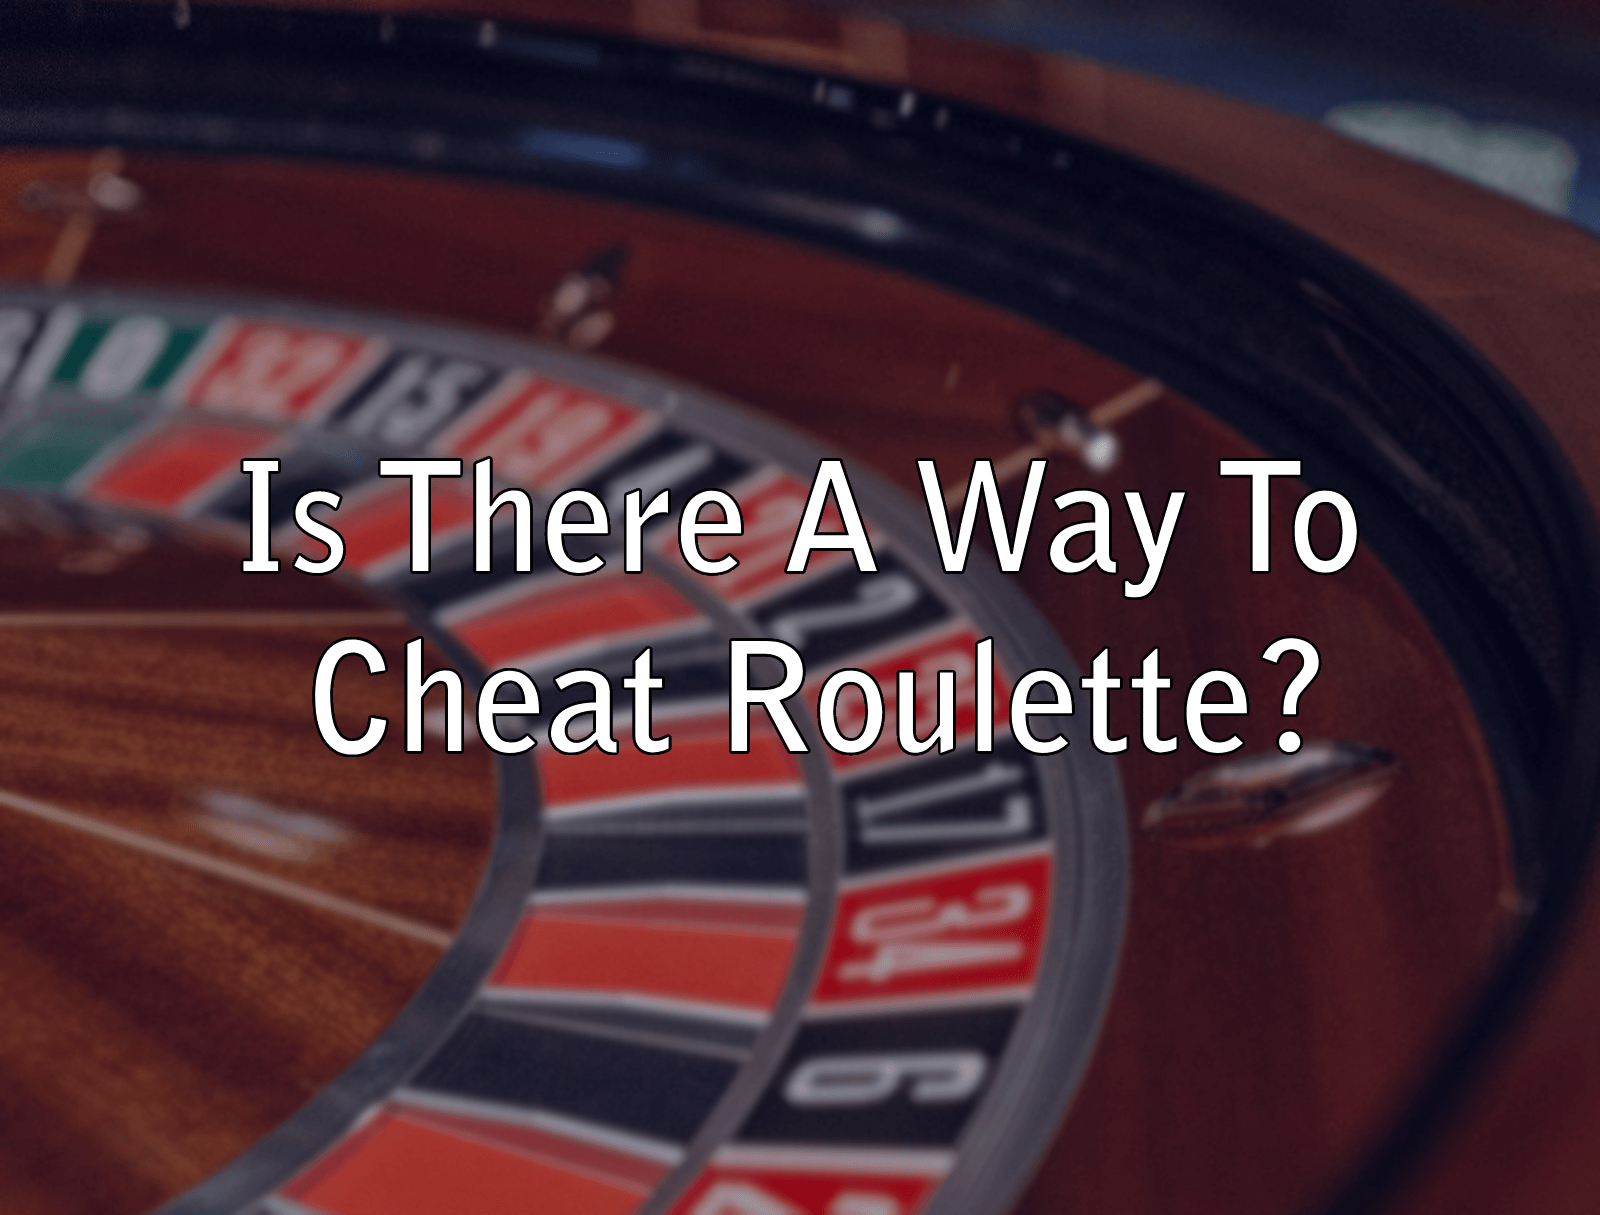 Is There A Way To Cheat Roulette?